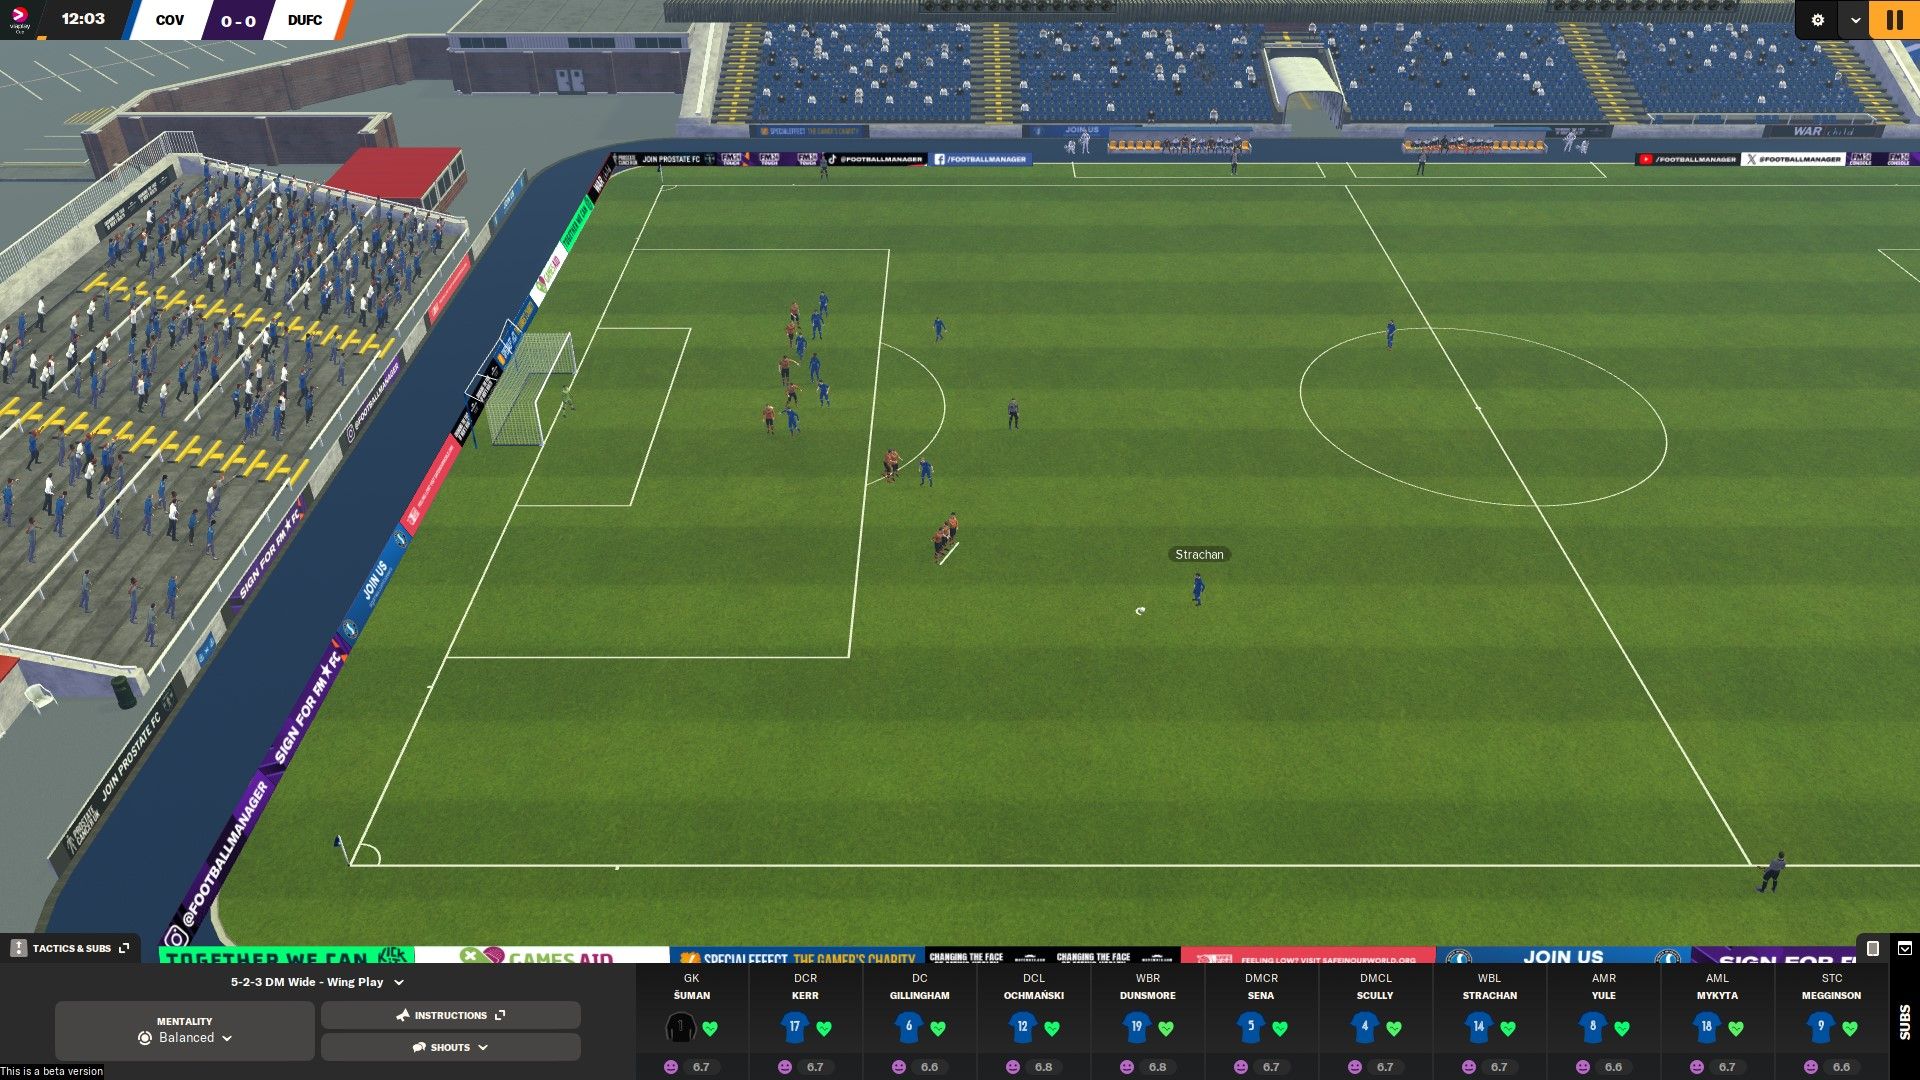 Football Manager 2024, Official Announce Trailer